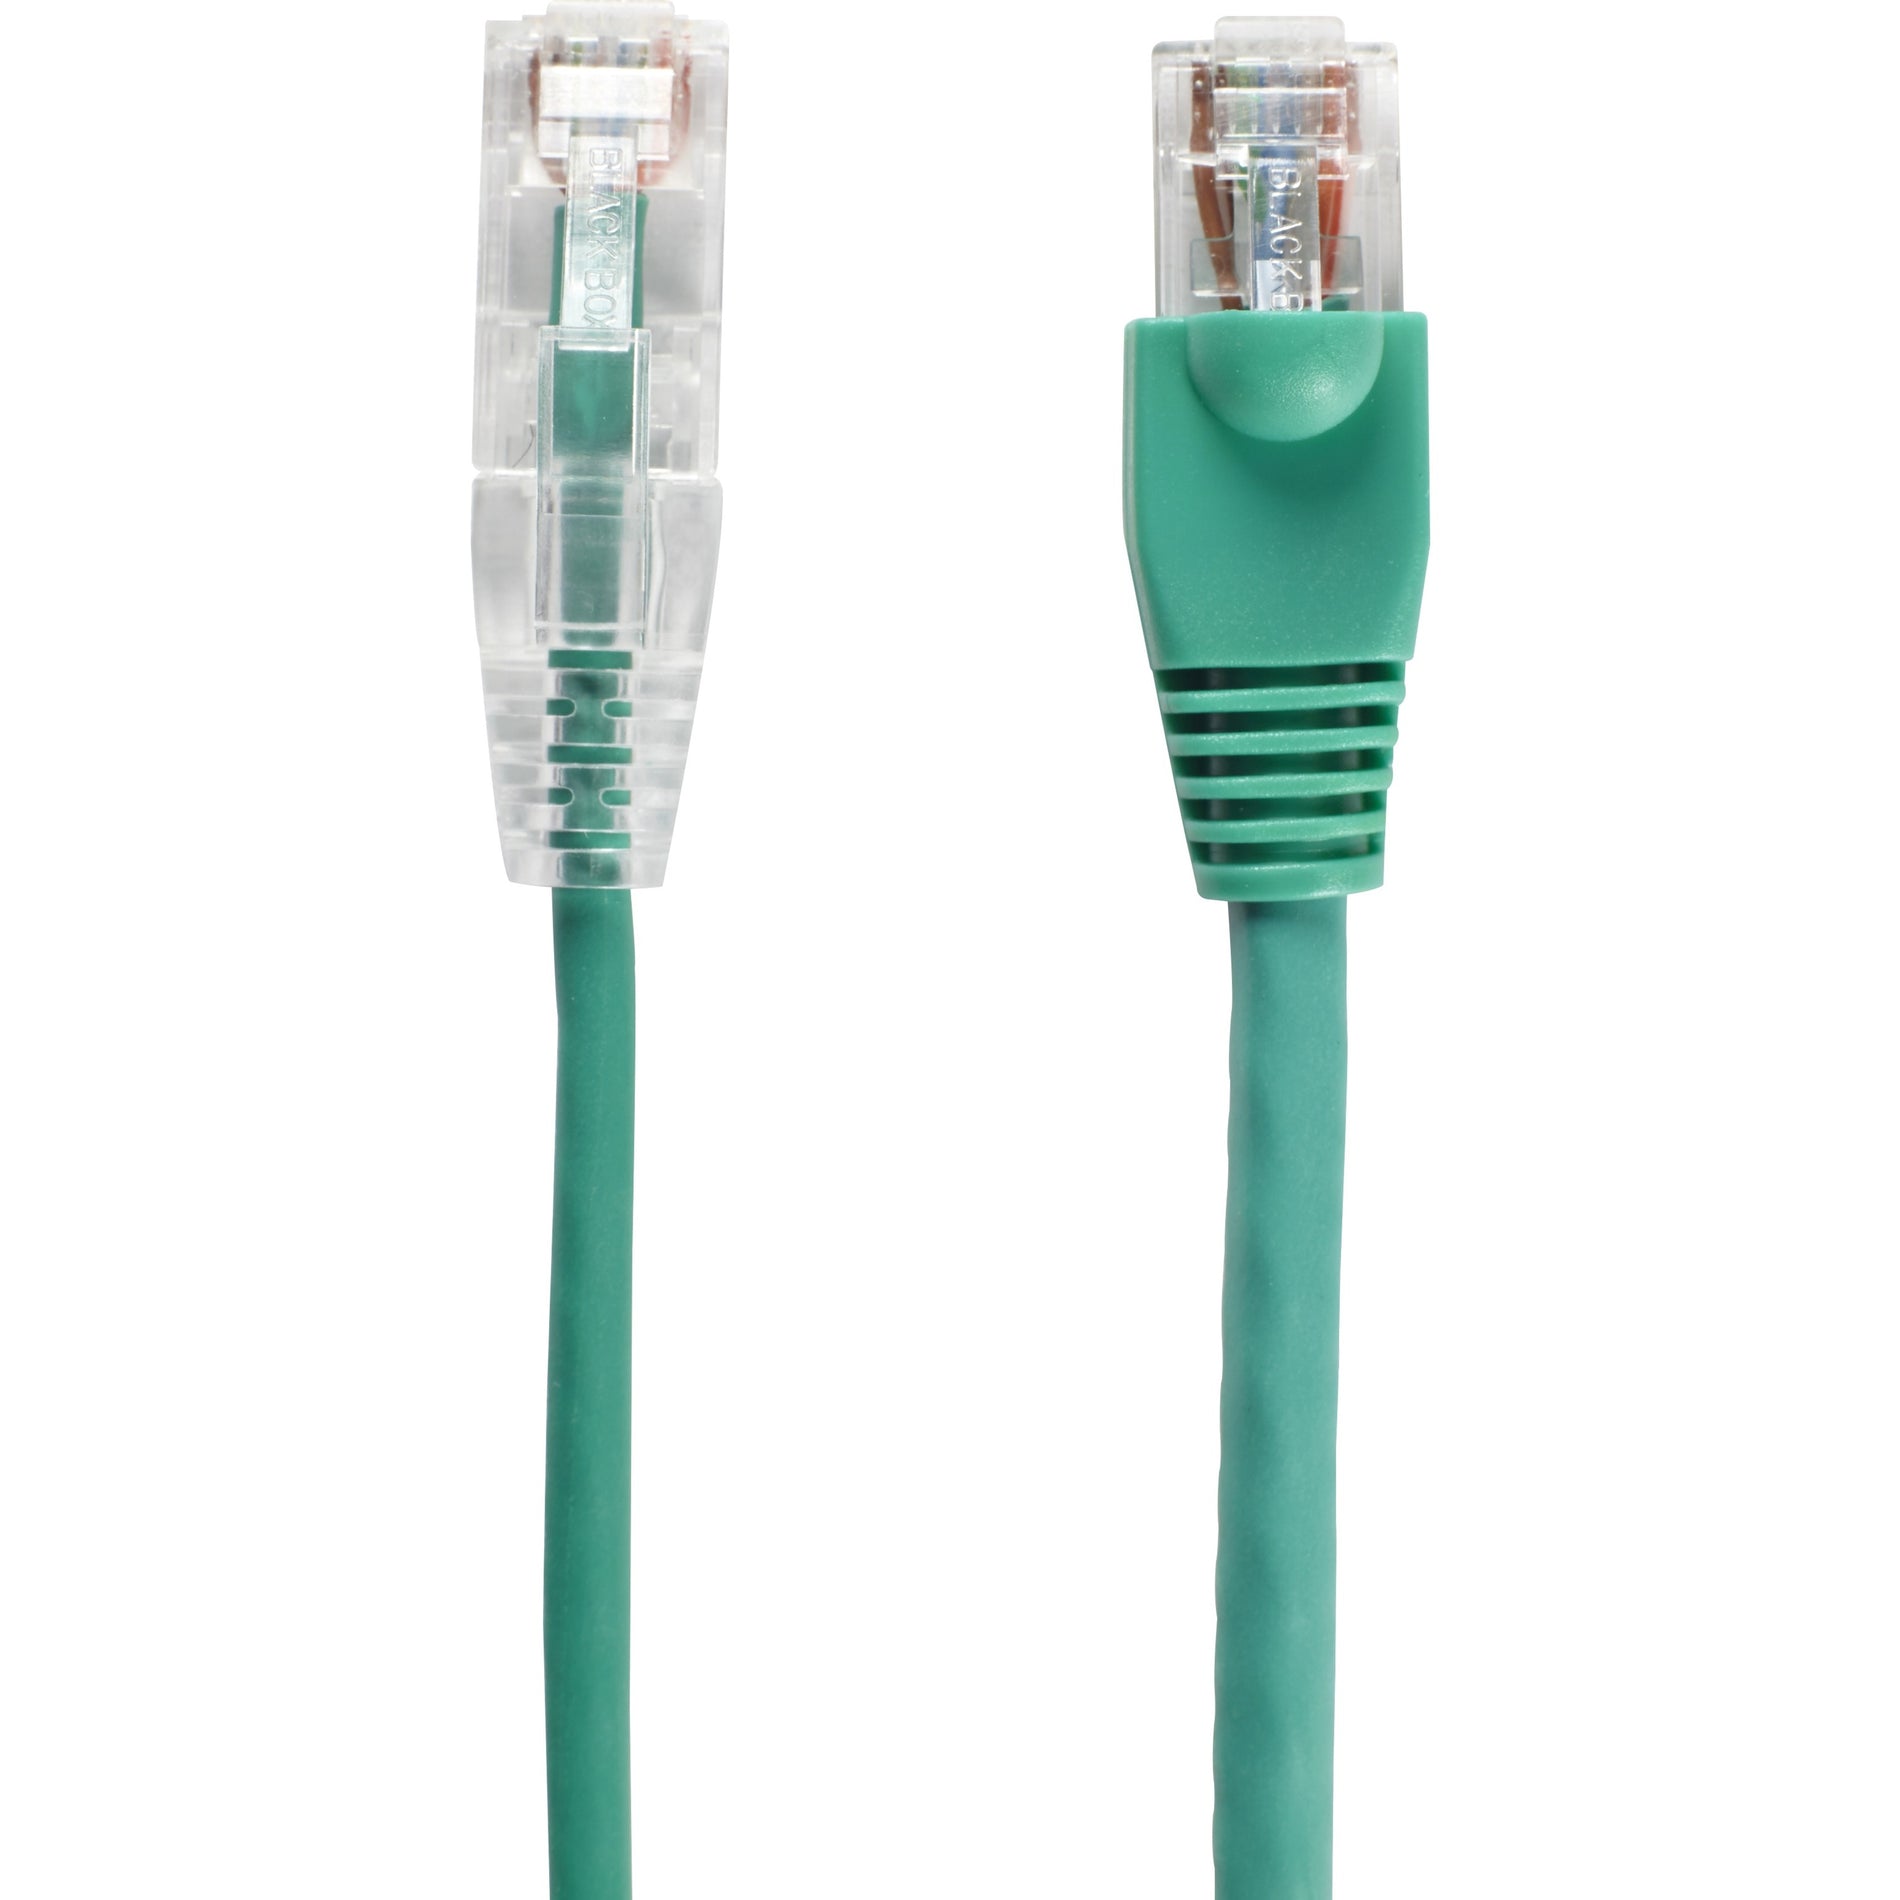 Black Box C6APC28-GN-02 Slim-Net Cat.6a UTP Patch Network Cable, 2 ft, Green